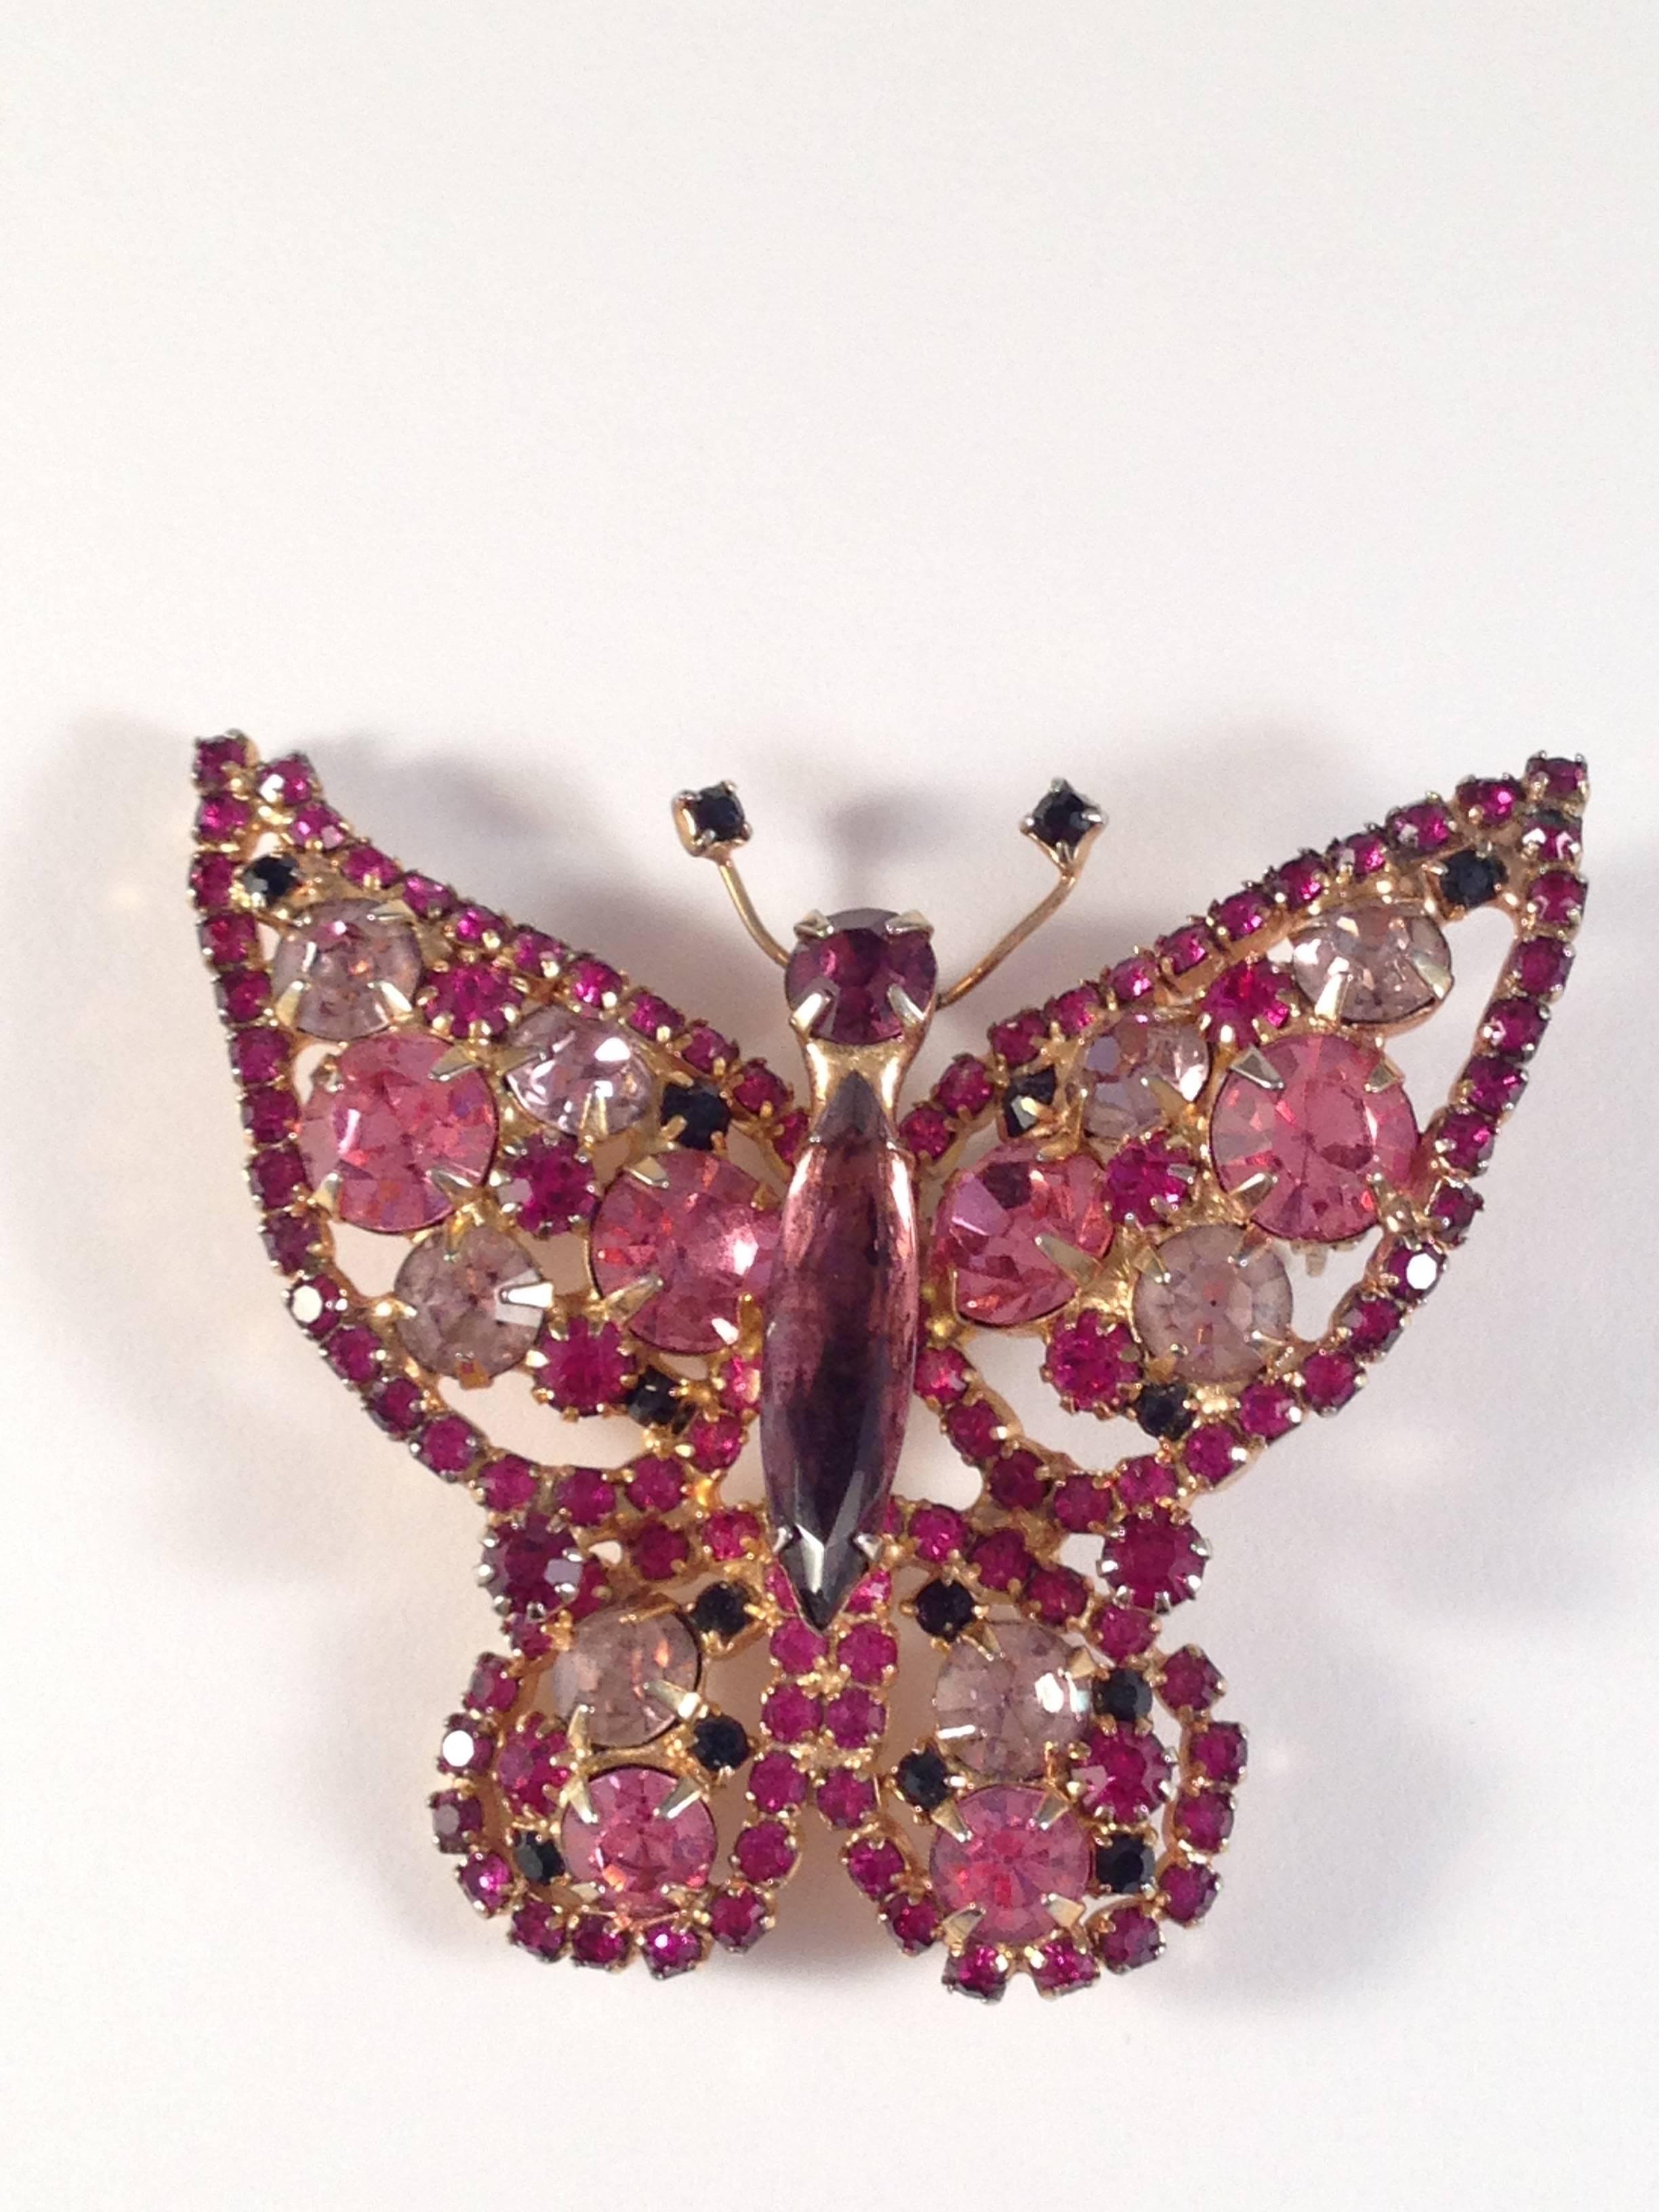 This is a beautiful signed Alice Caviness butterfly brooch. It is set in a gold toned setting and has pink, purple and lavender glass stones. It is signed 